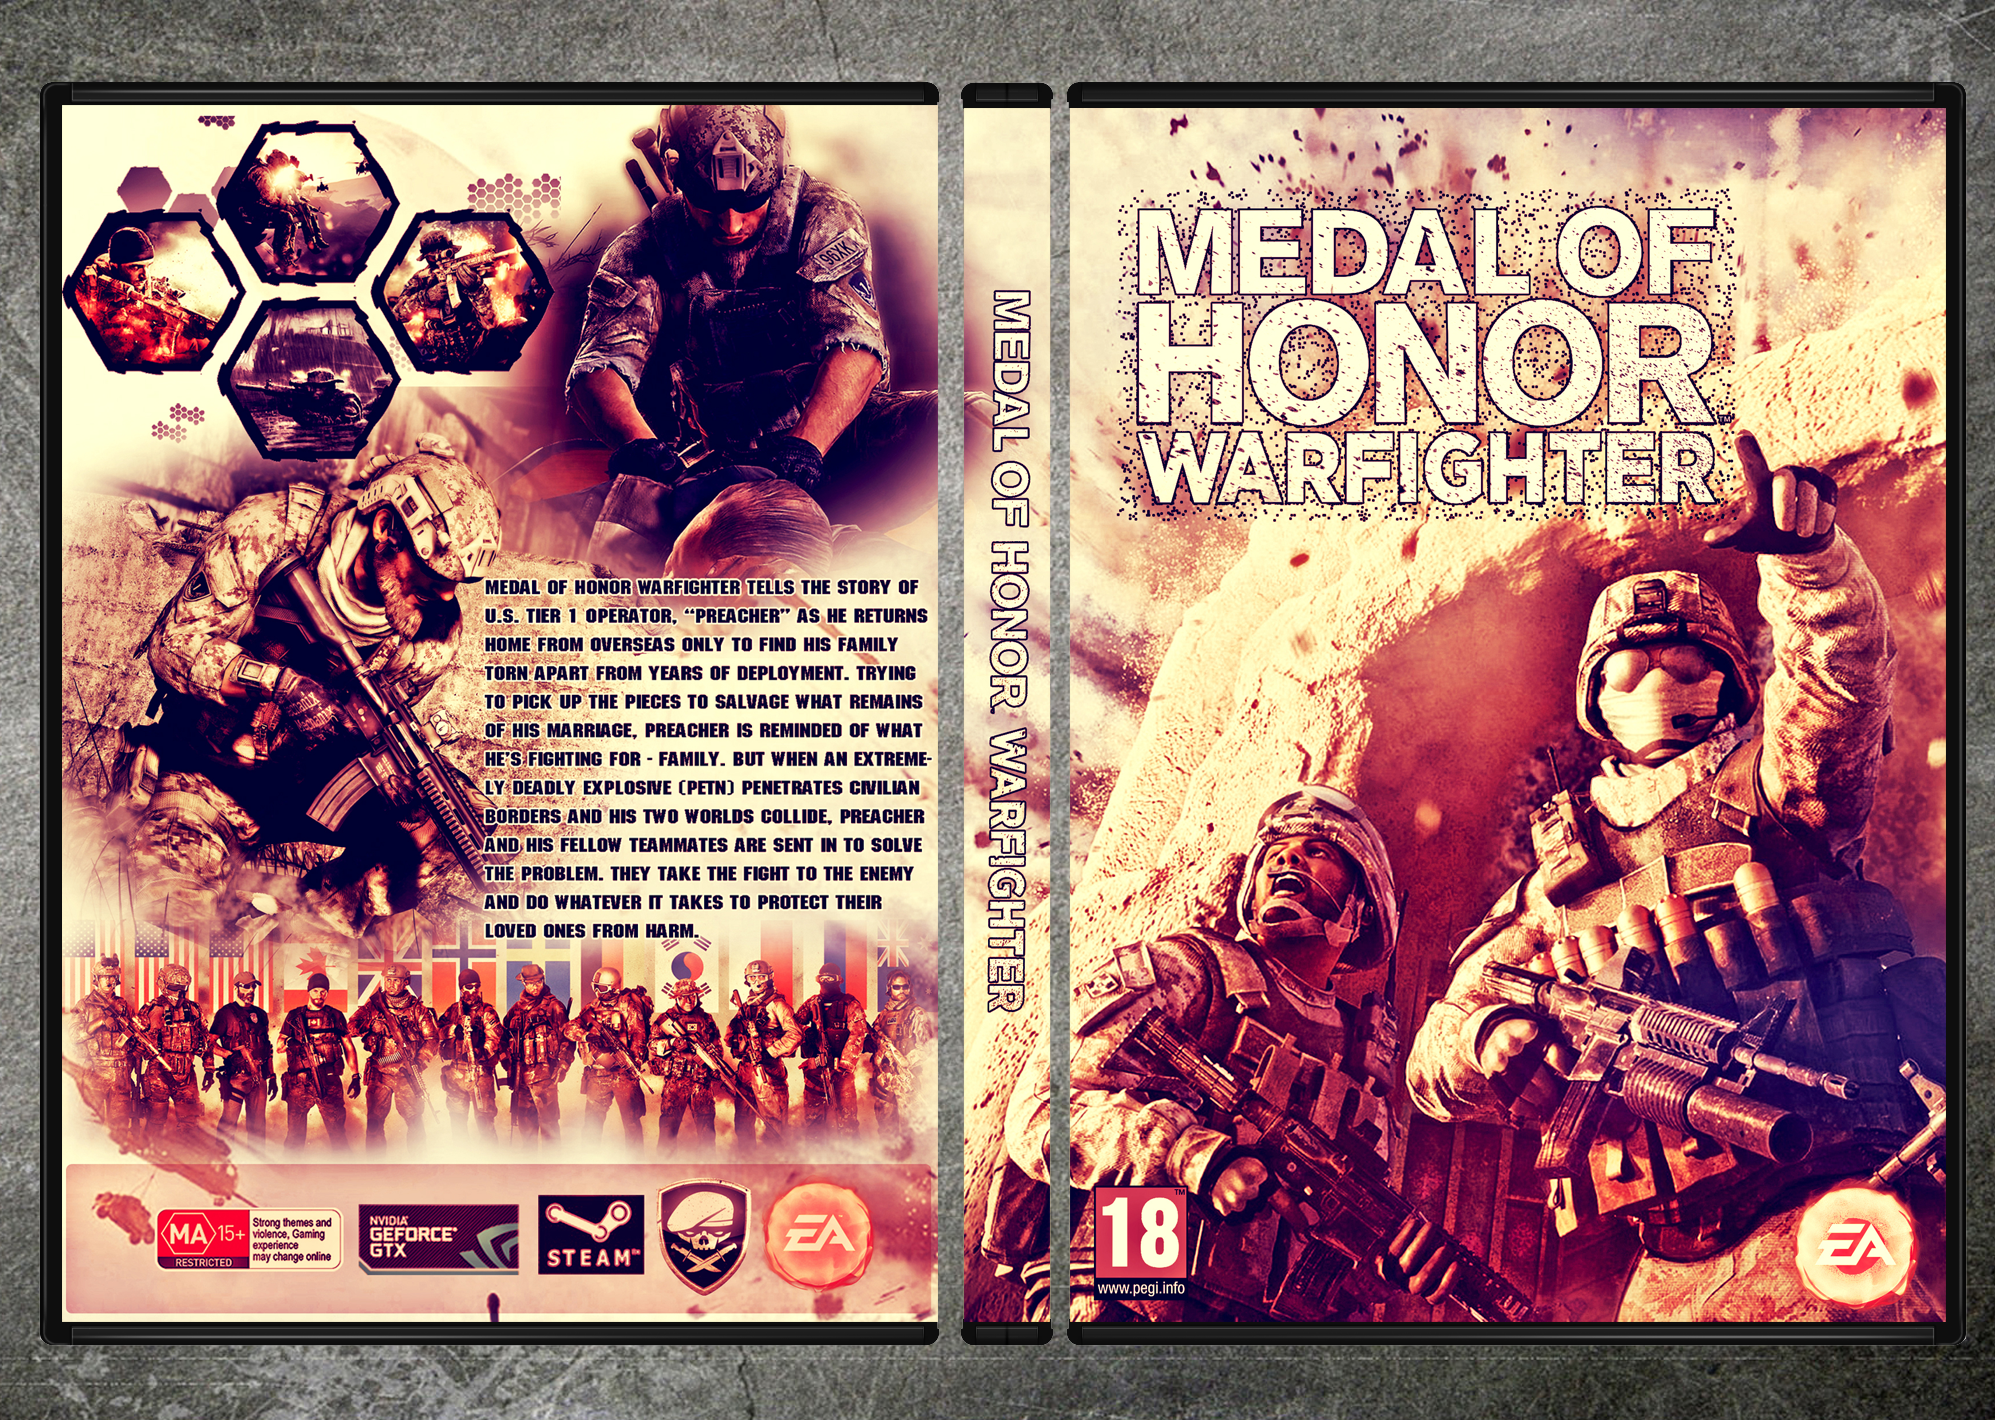 Medal of Honor обложка. Плакат Medal of Honor диск. Причер медаль за отвагу. Medal of Honor: Warfighter PNG. Medal of honor 360